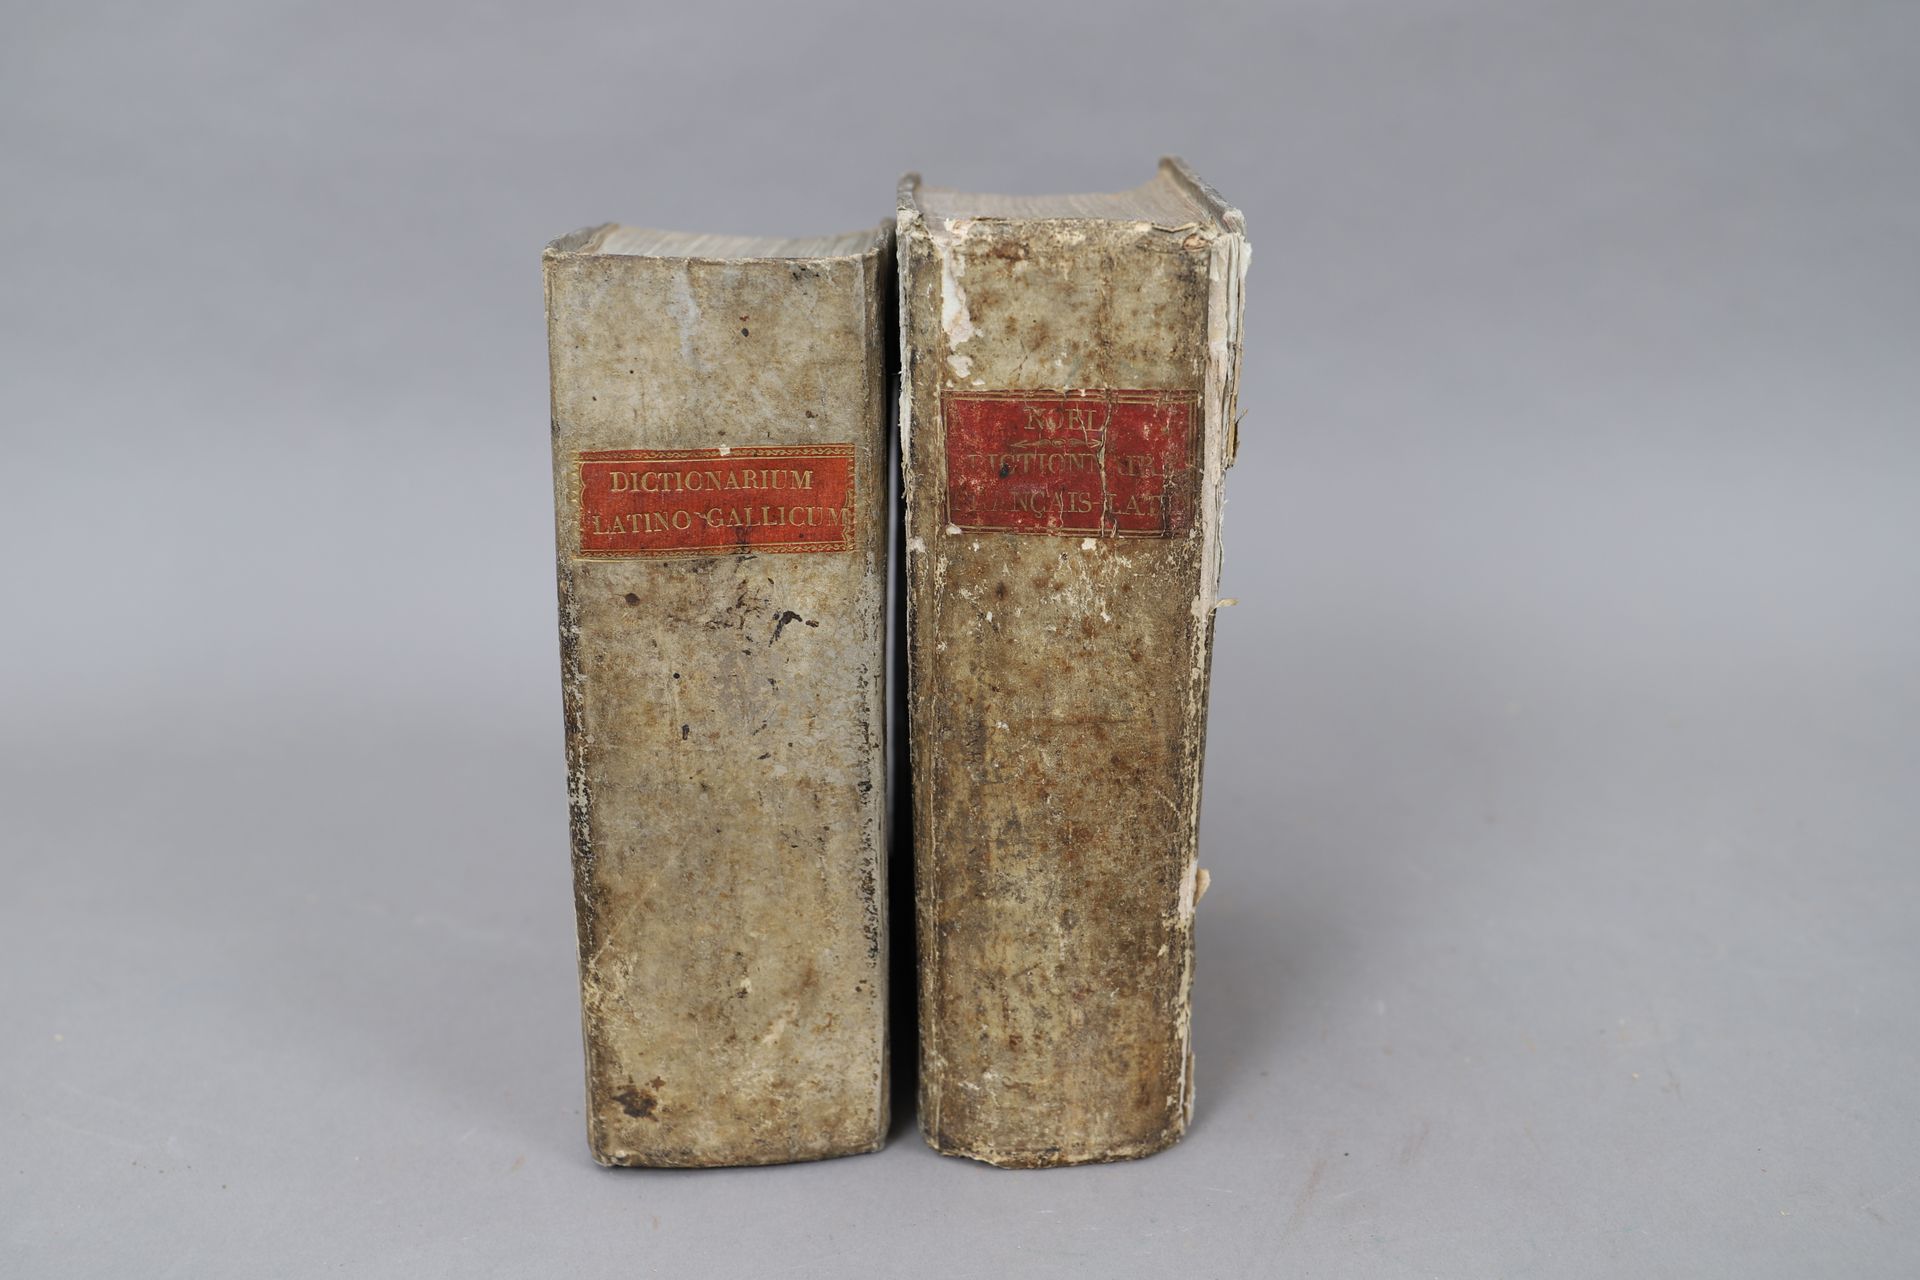 Null FRENCH-LATIN DICTIONARY. 1813.

2 bound volumes.